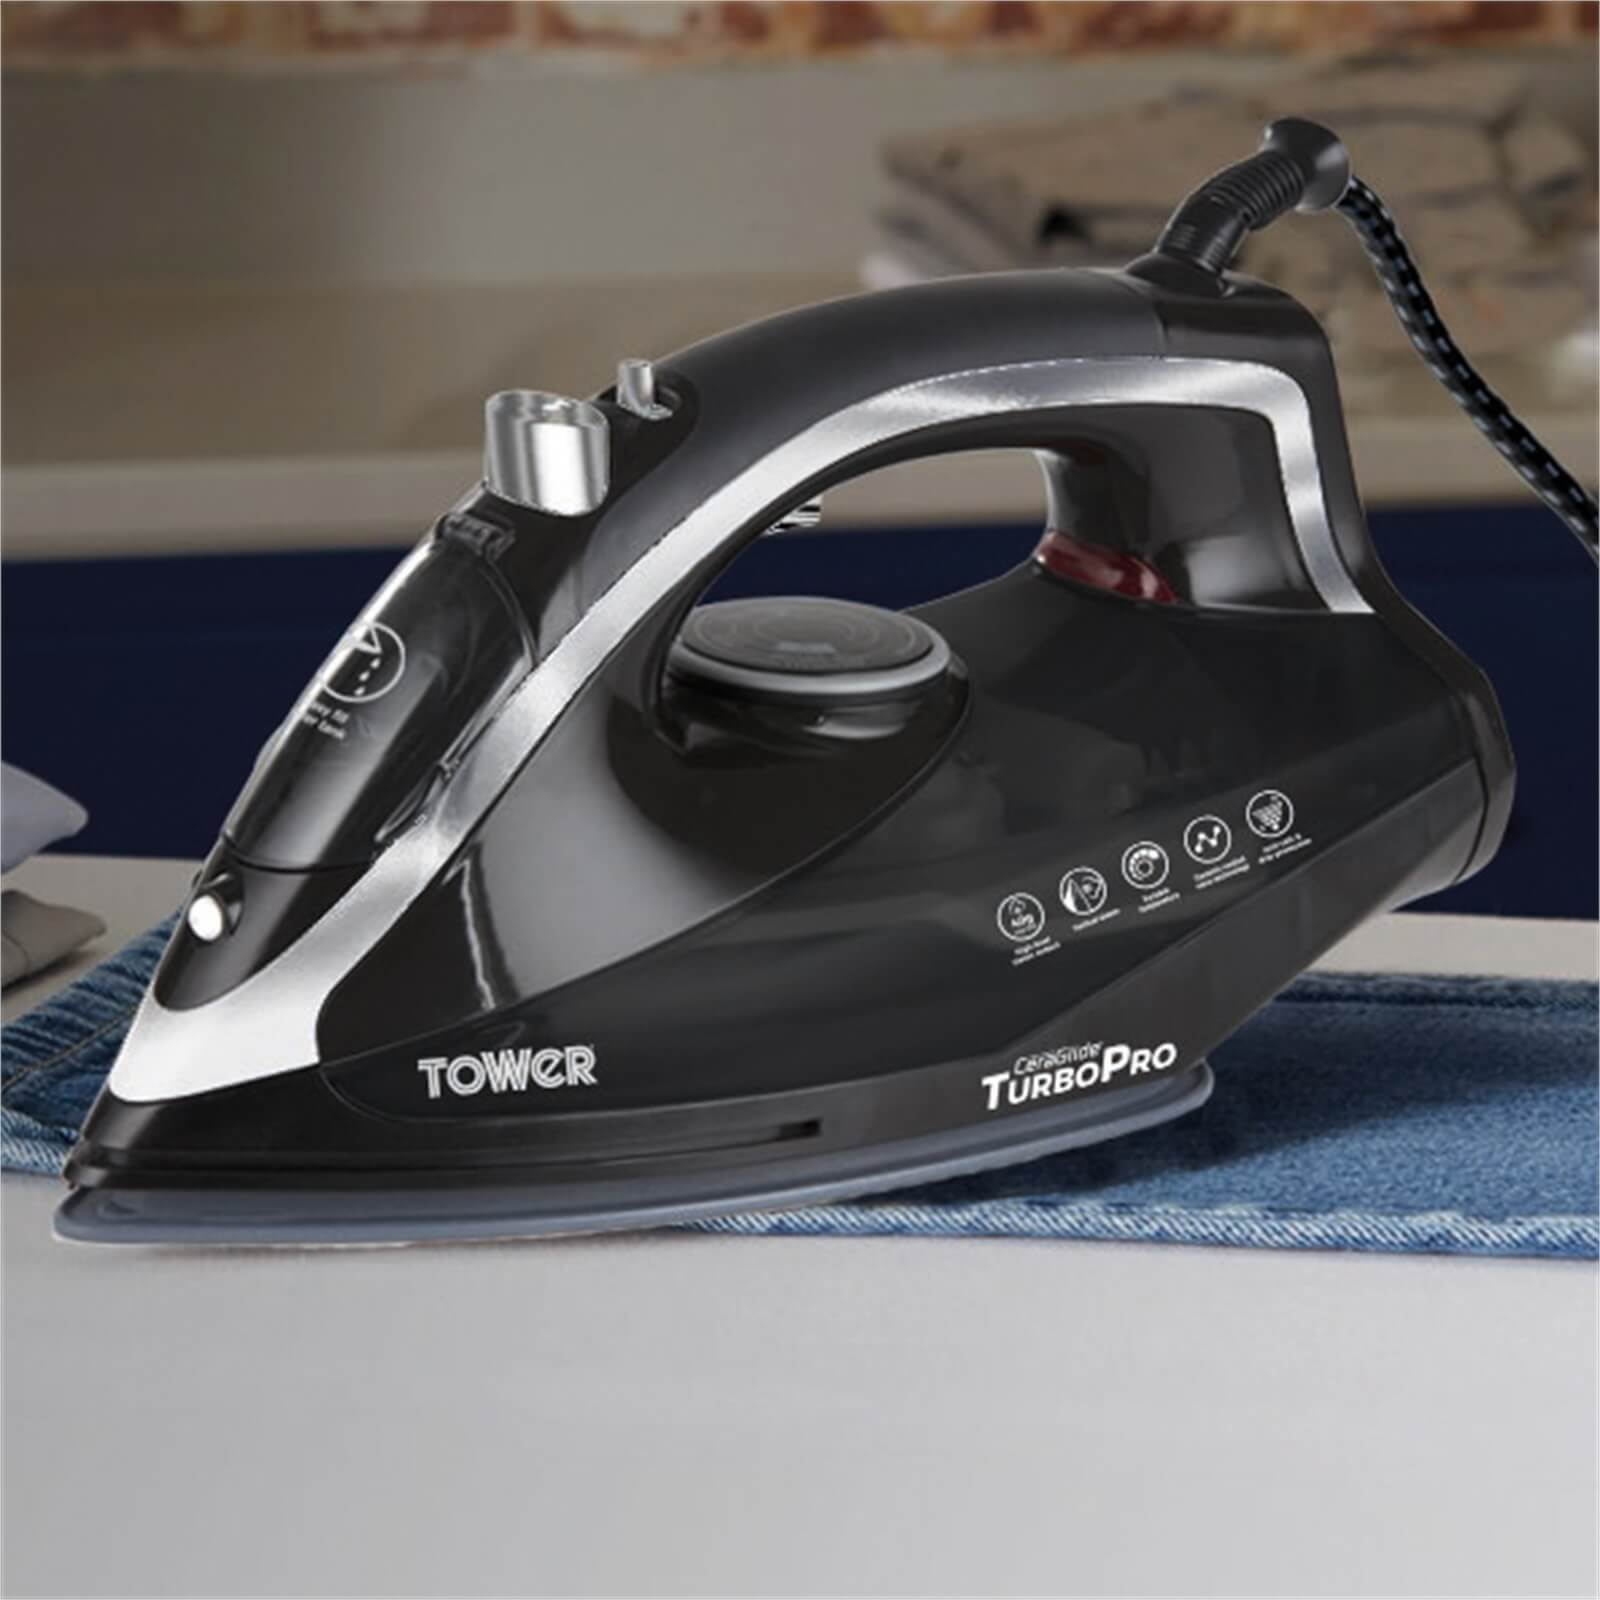 Steam Iron With Built-in Steam Generator